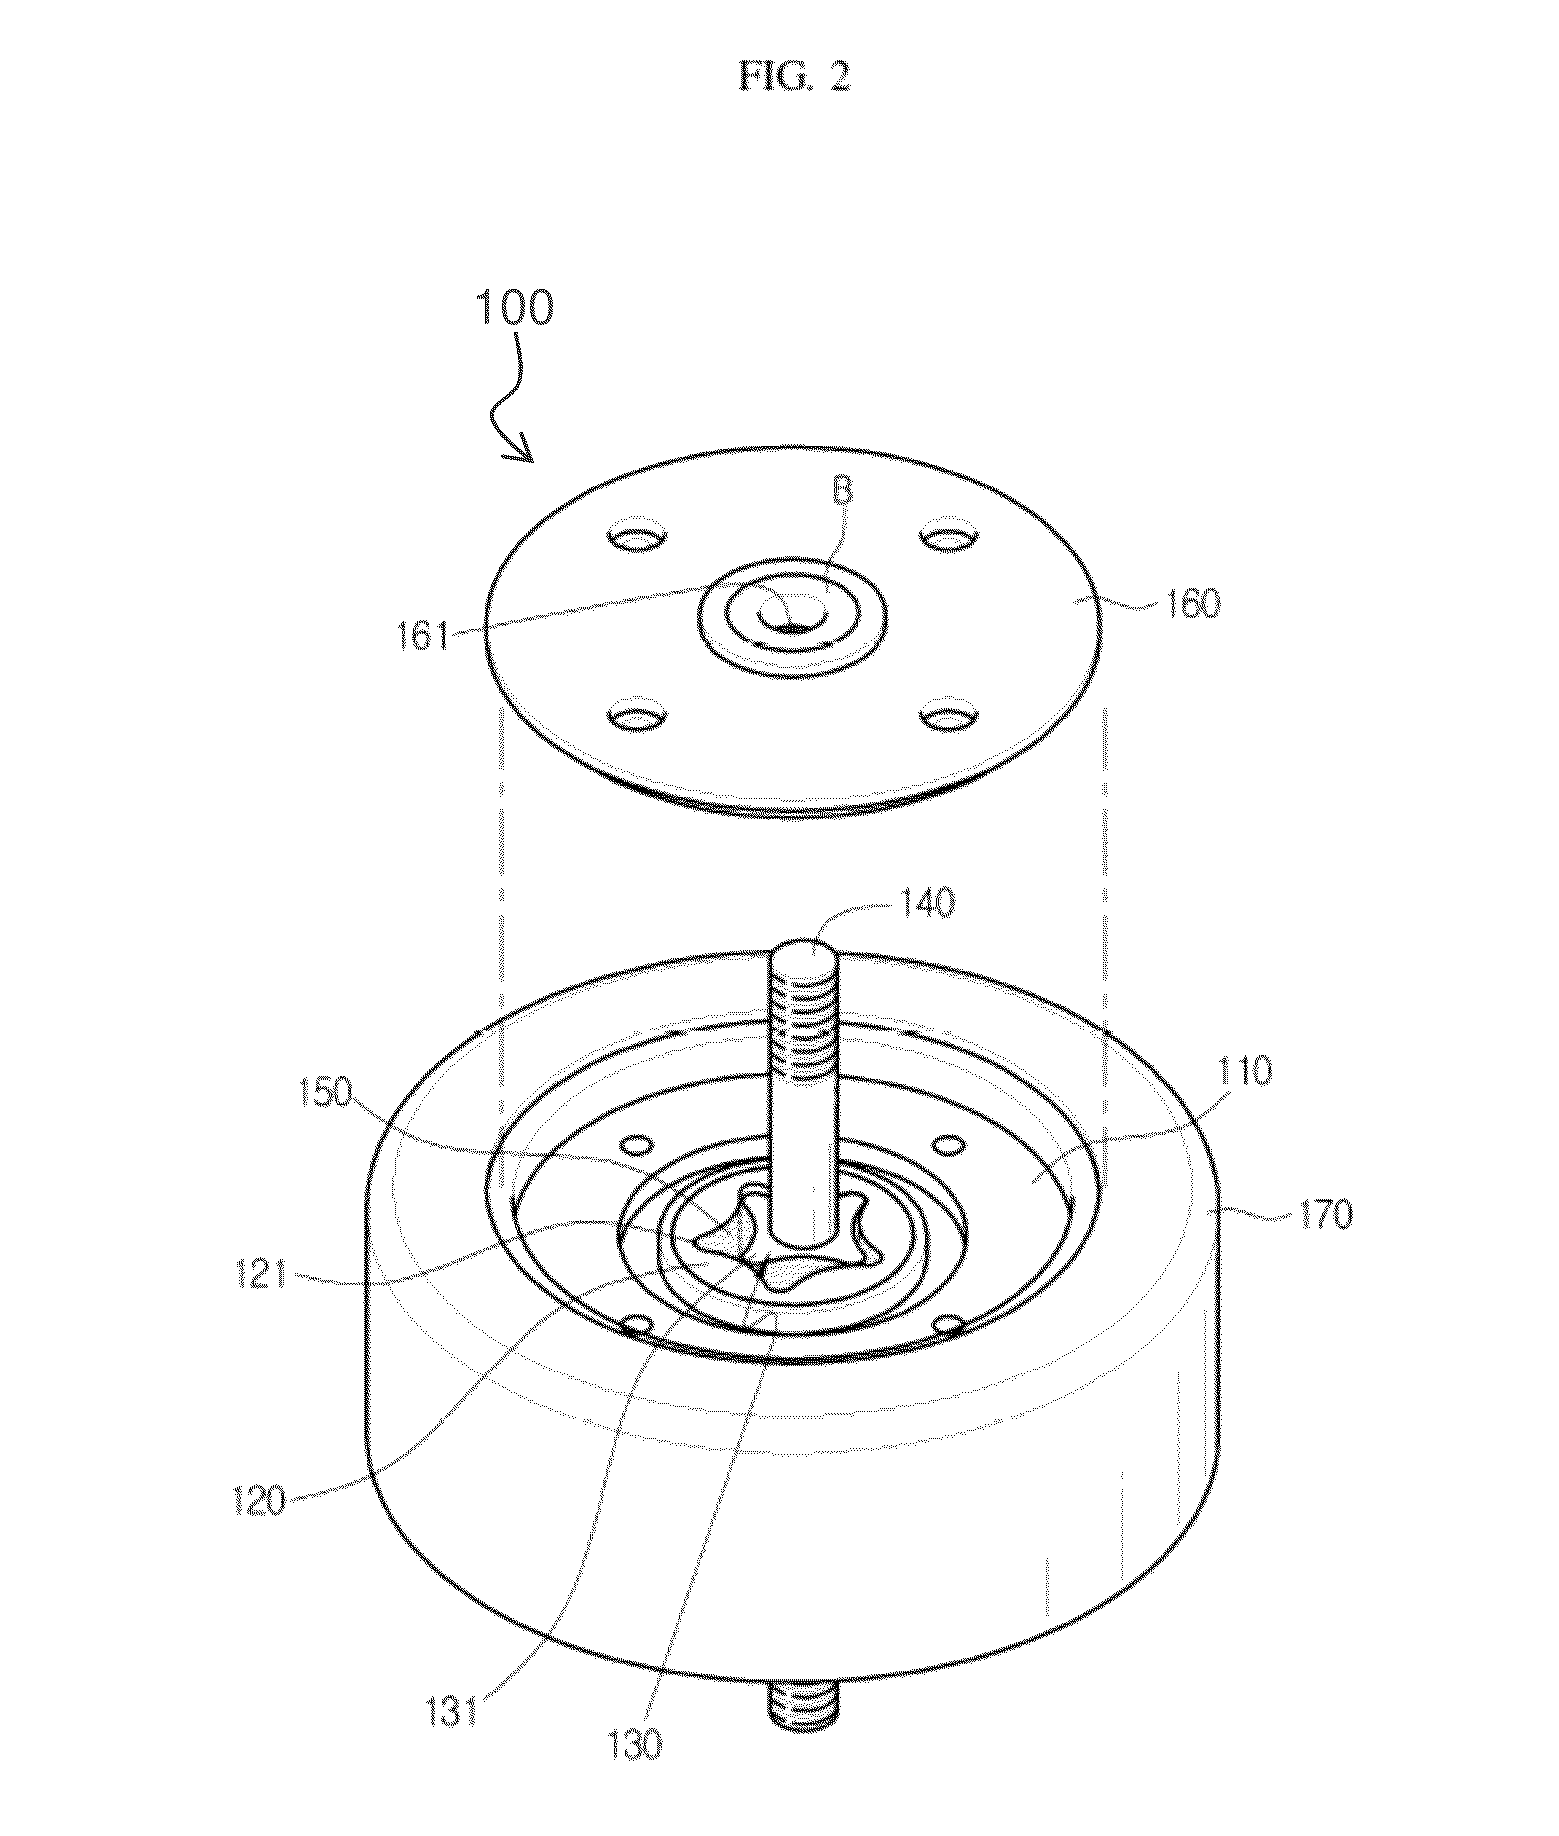 Active speed restricting wheel assembly